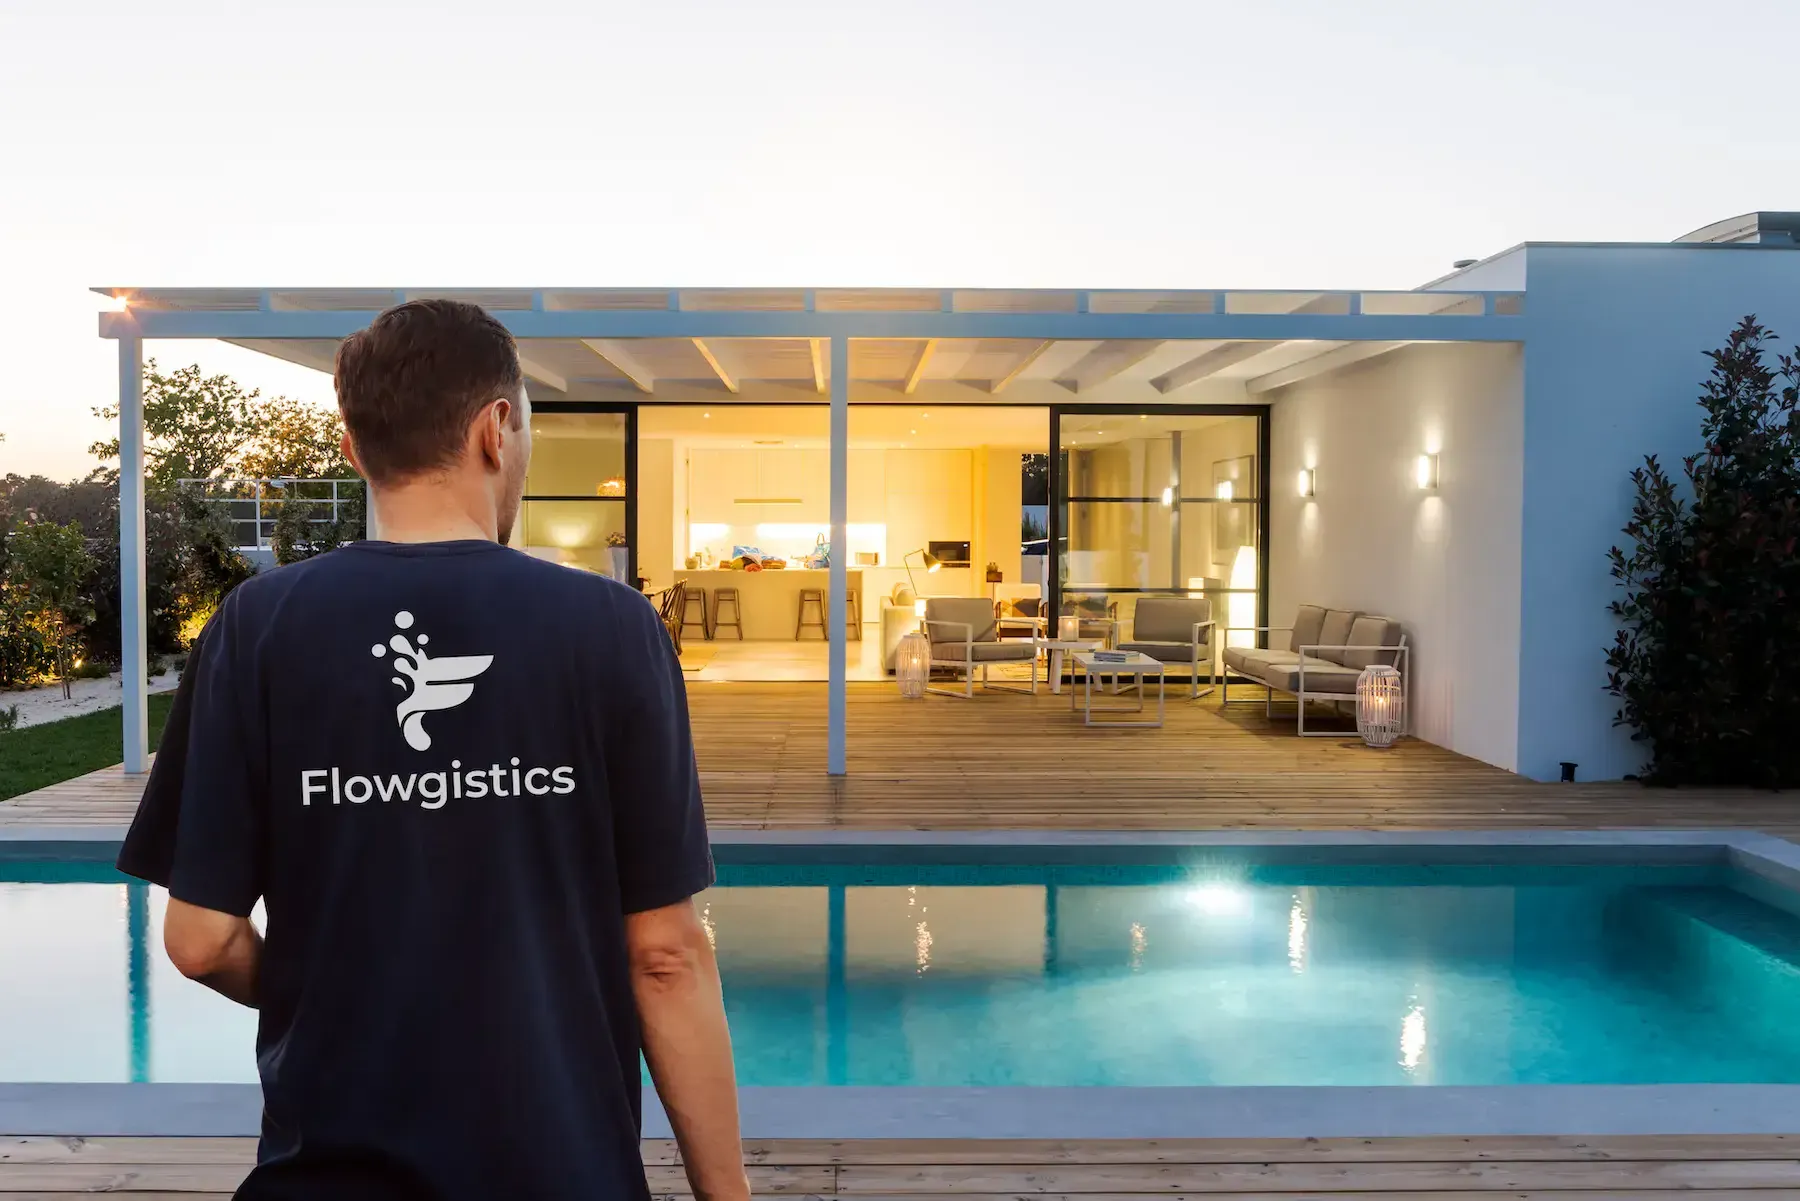 A Flowgistics employee looks over a luxury swimming pool